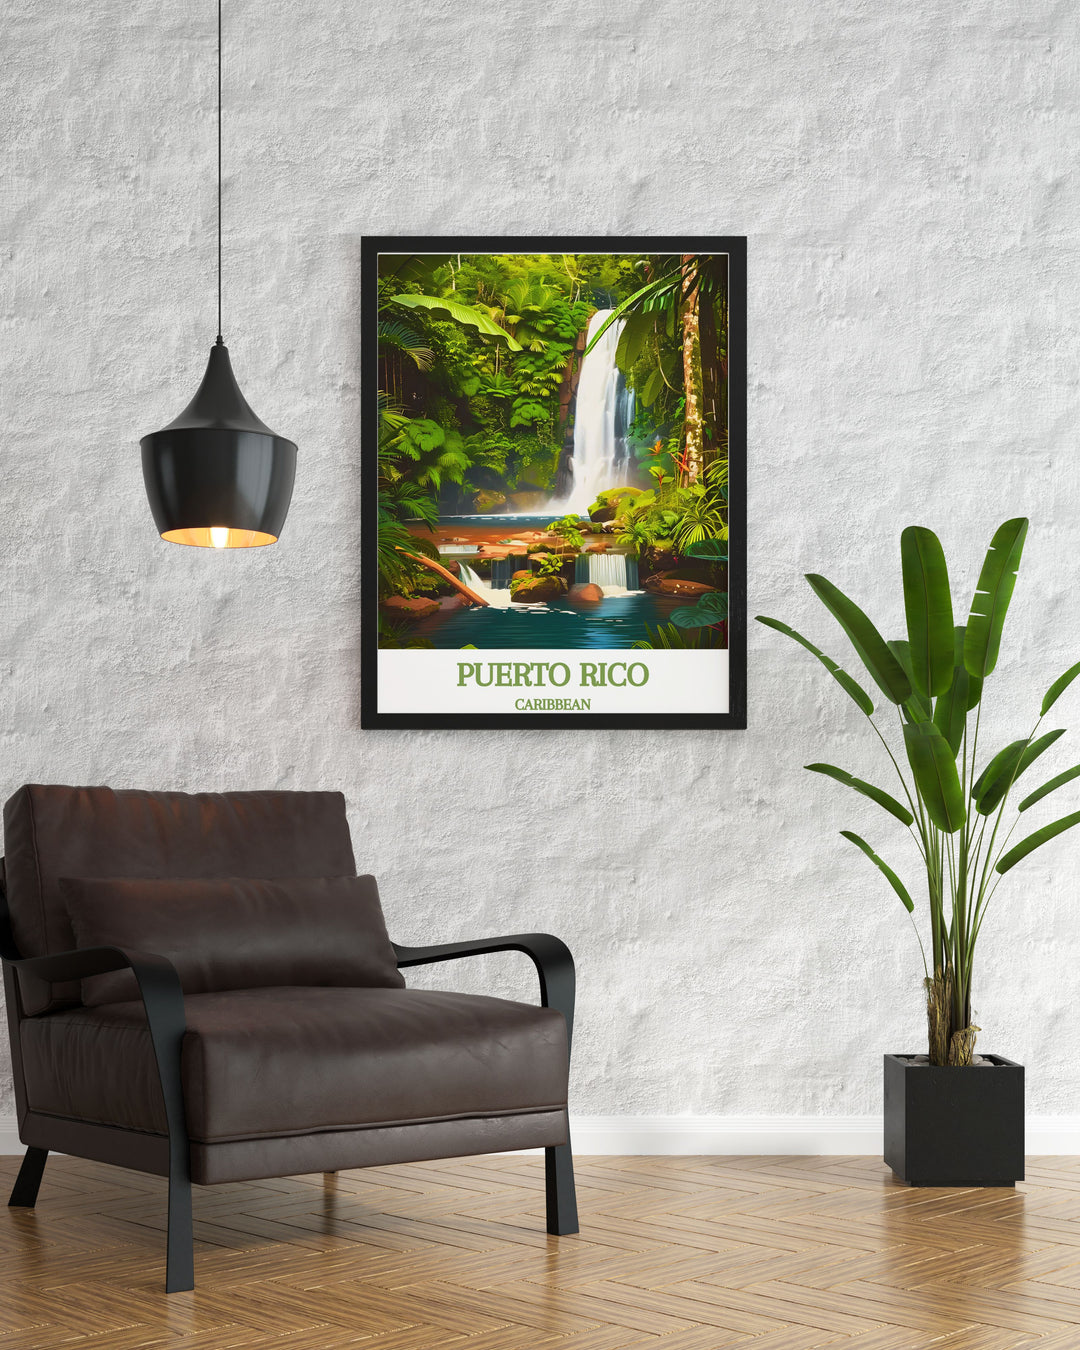 Beautiful Arecibo poster showcasing the majestic CARIBBEAN, El Yunque National Forest. This vintage print adds a touch of natural charm to any space. Great for personalized gifts or as part of a travel poster collection.